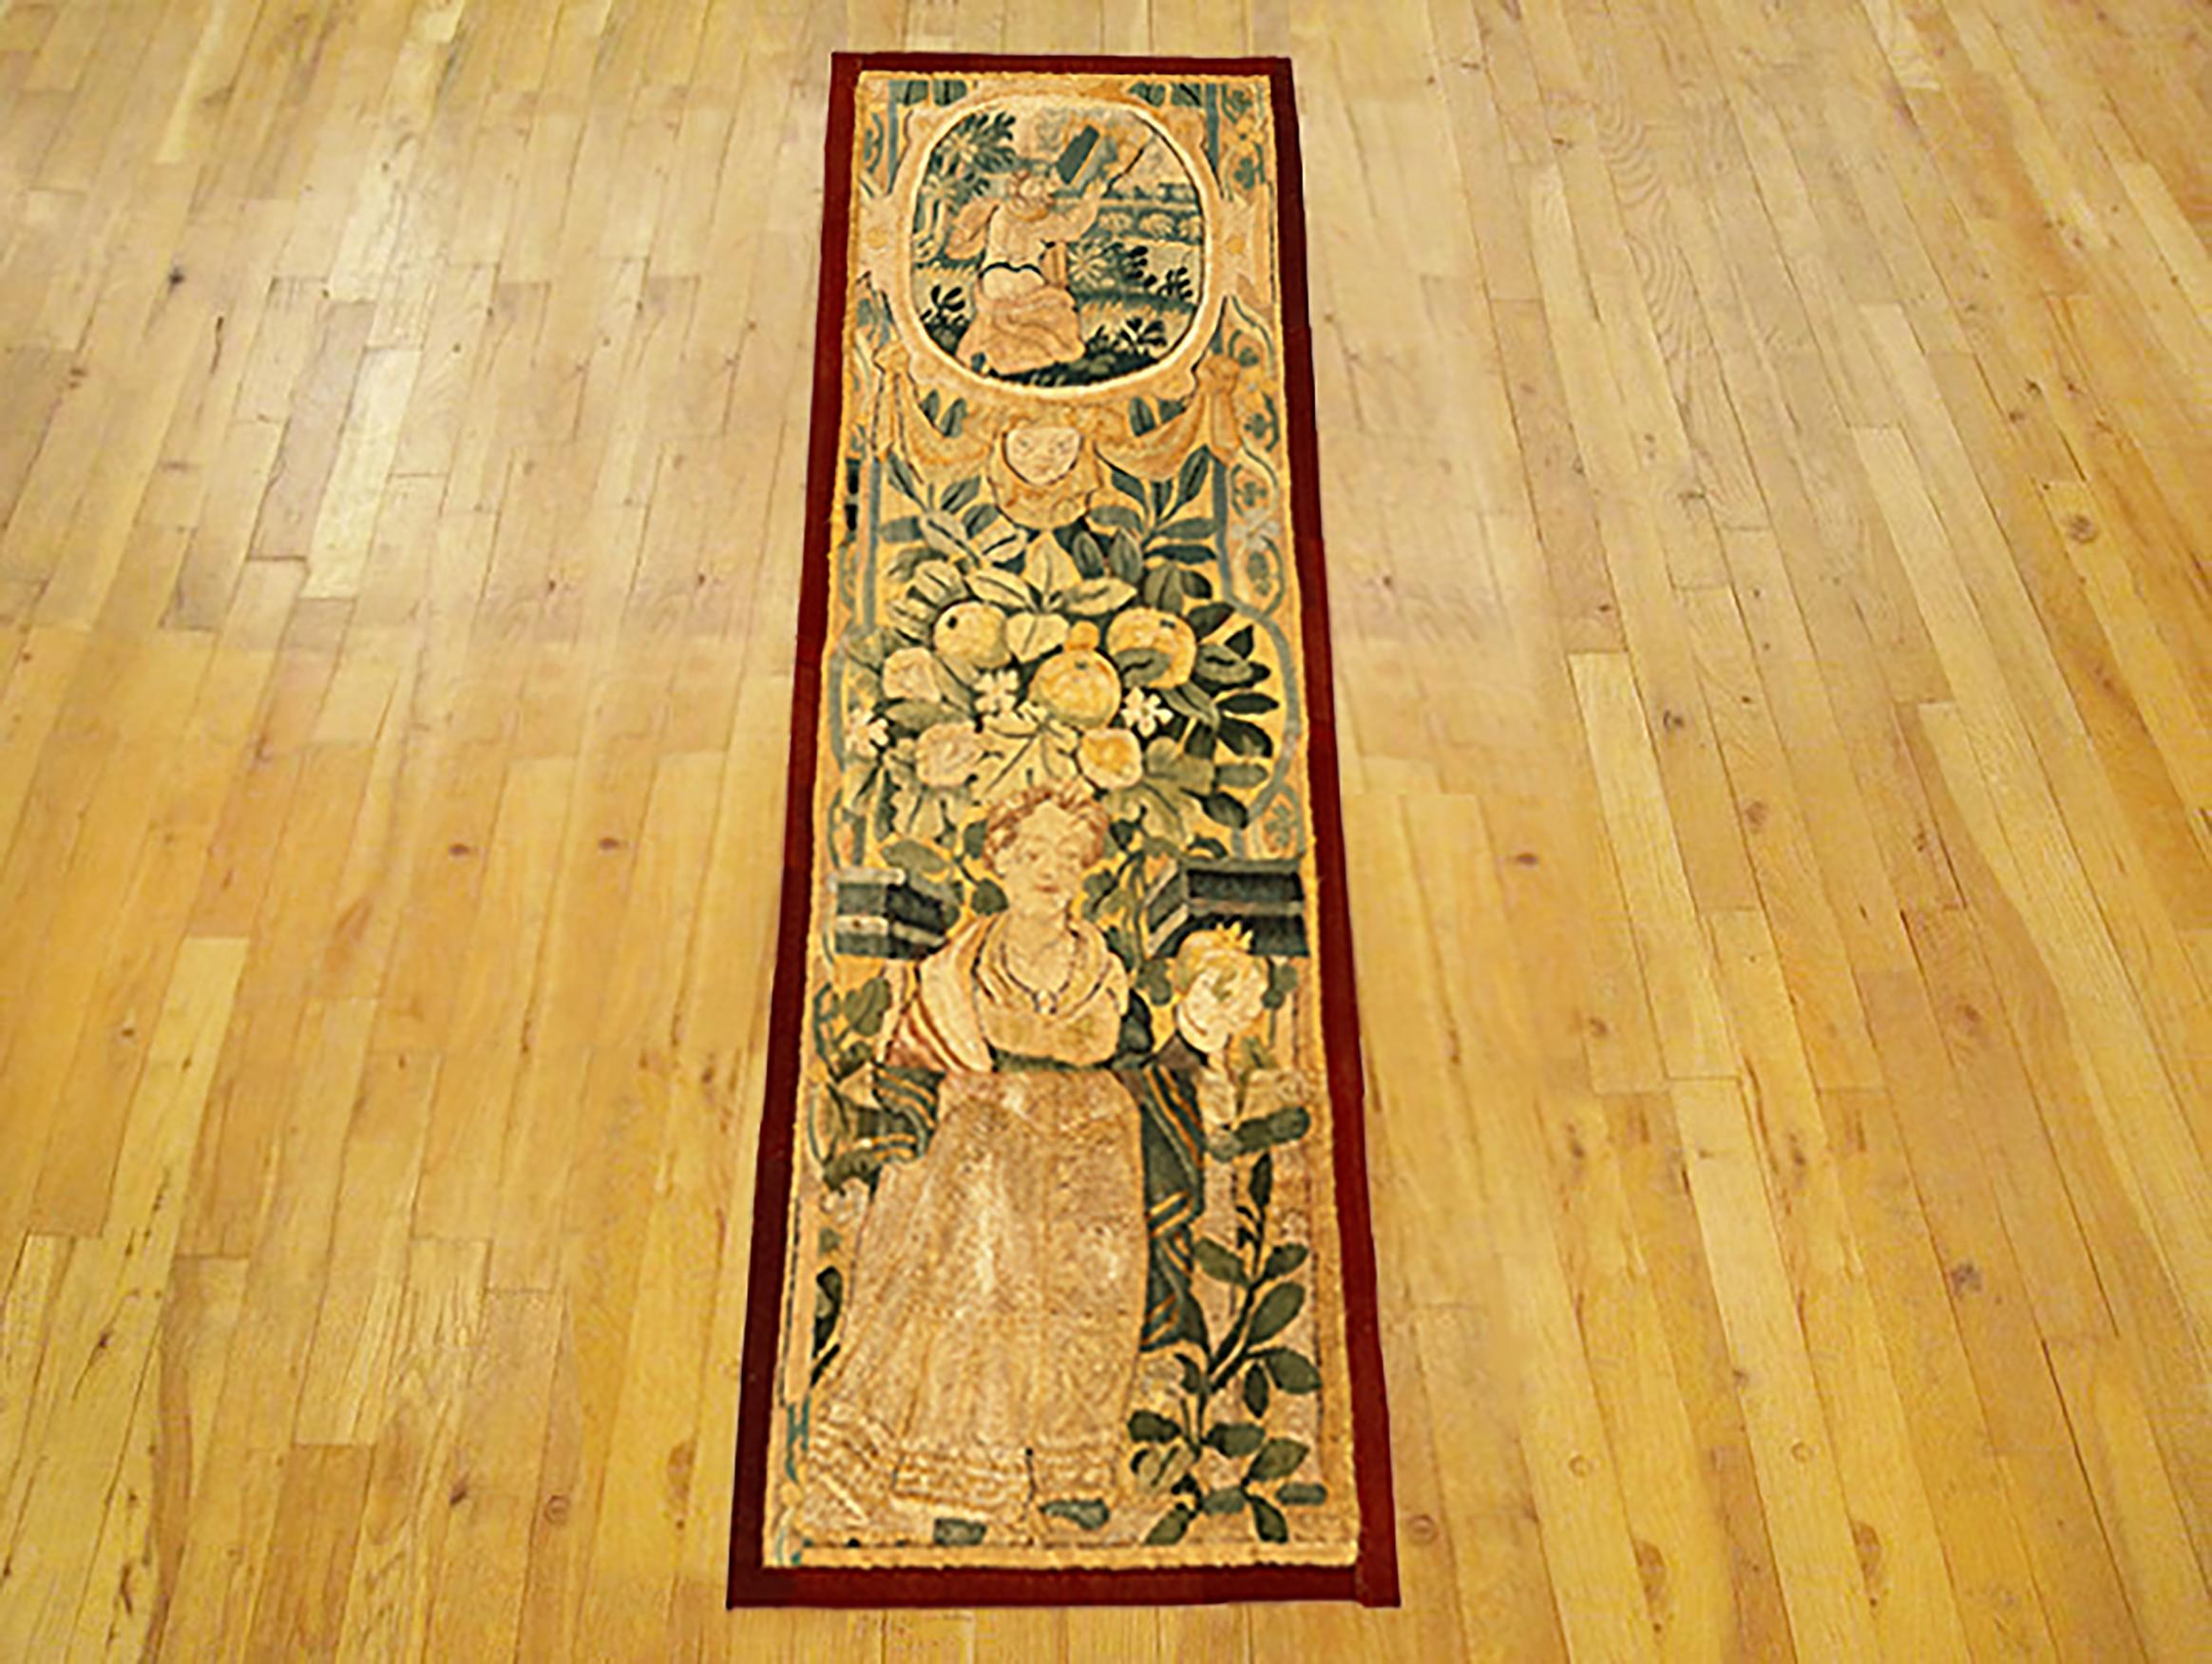 A 17th century Flemish Historical Tapestry panel. This vertically oriented decorative tapestry panel depicts a female figure at bottom, with a floral reserve above her, and with another female figure in a pendant cartouche at top. The central area